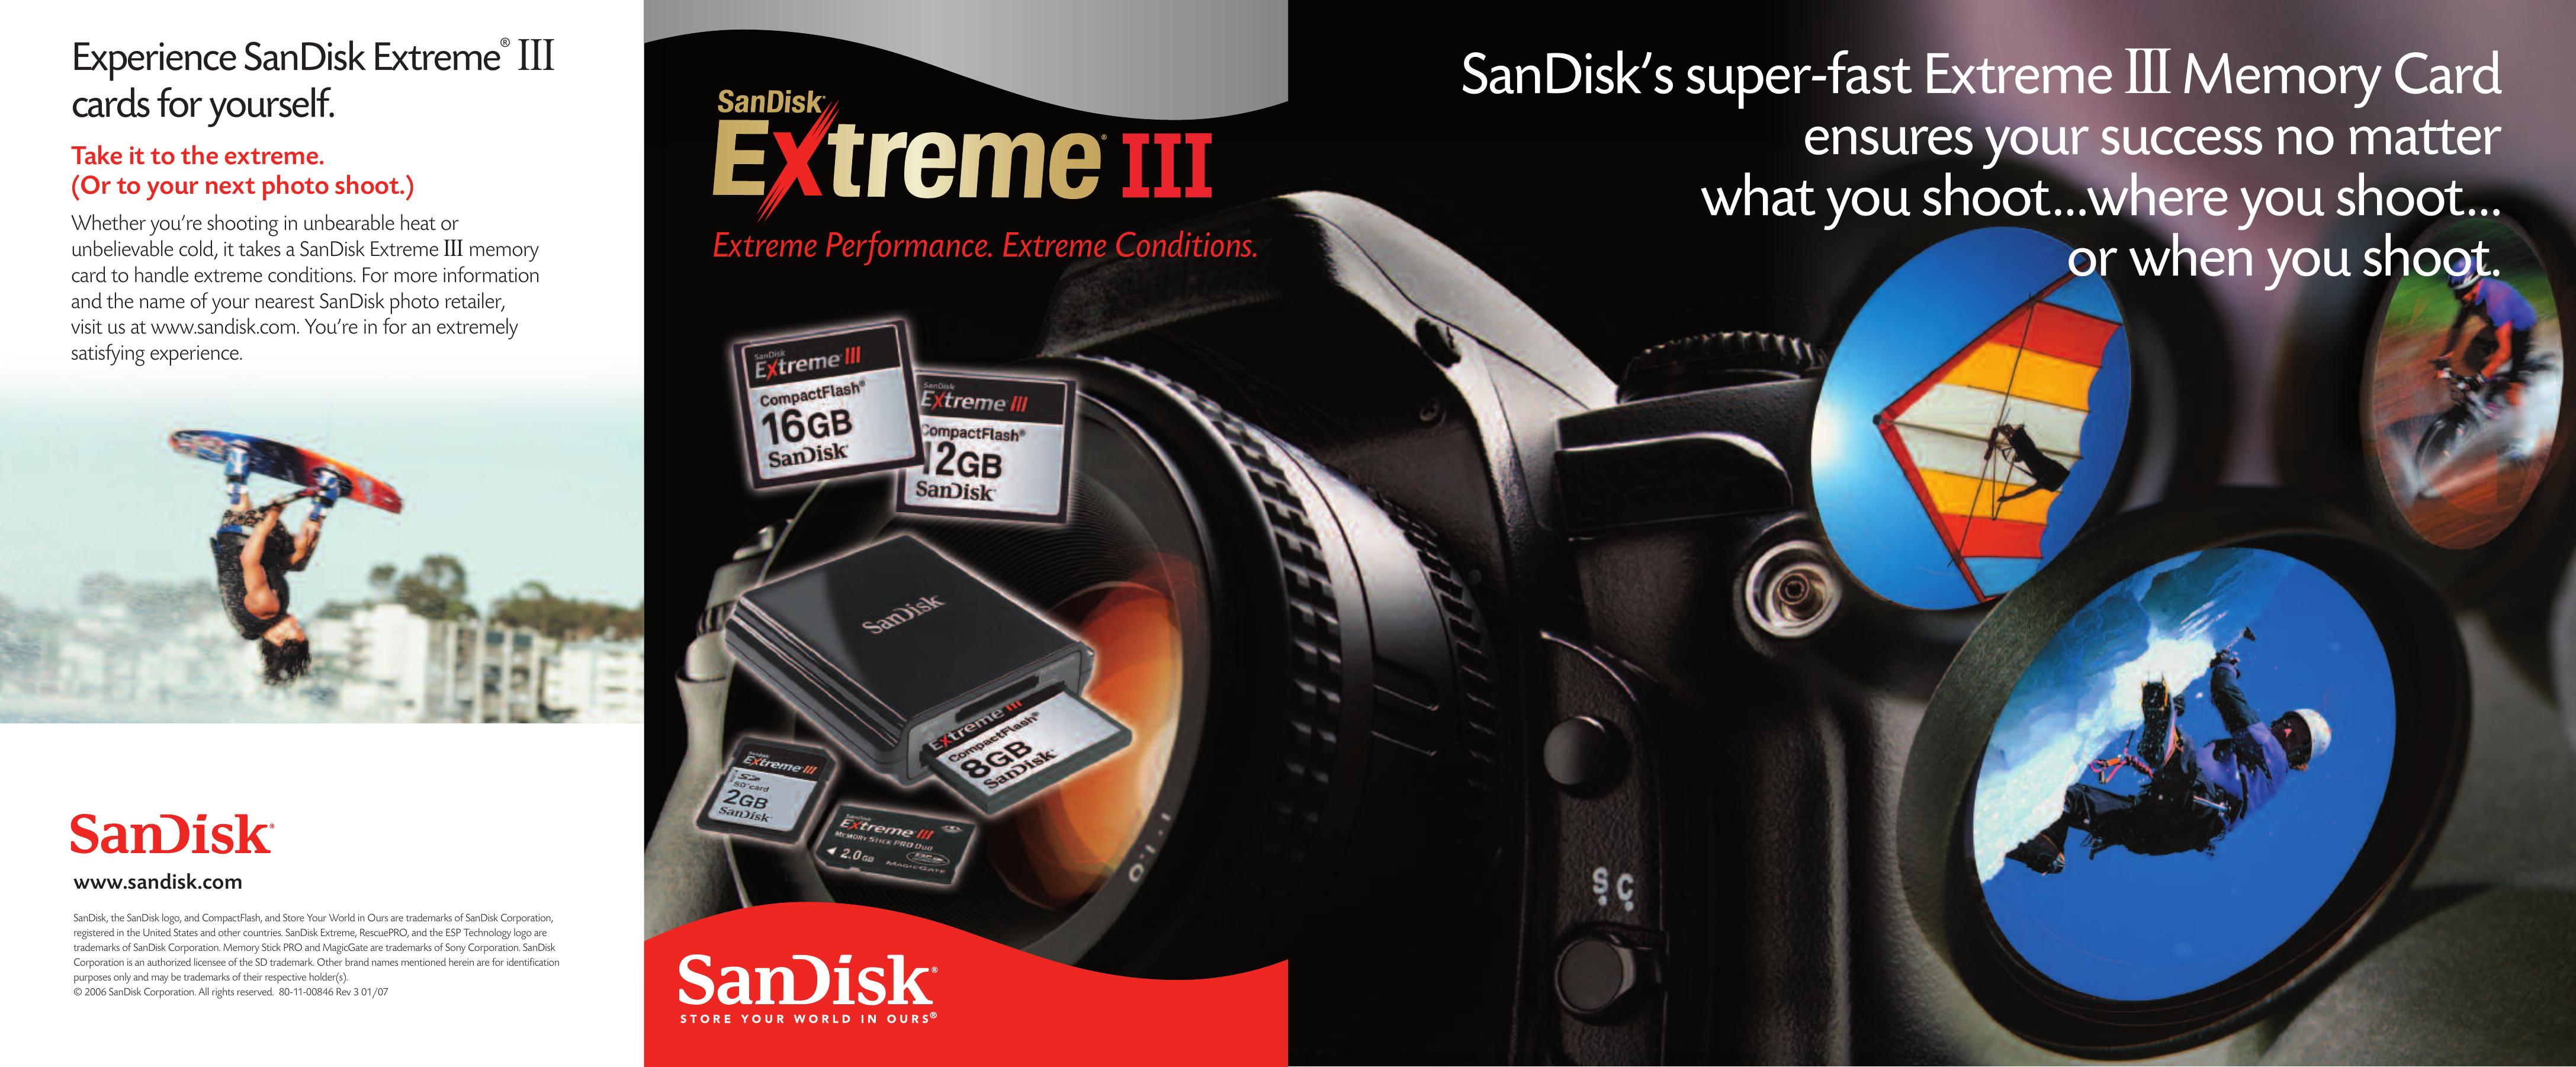 SanDisk Extreme III Camera Accessories User Manual